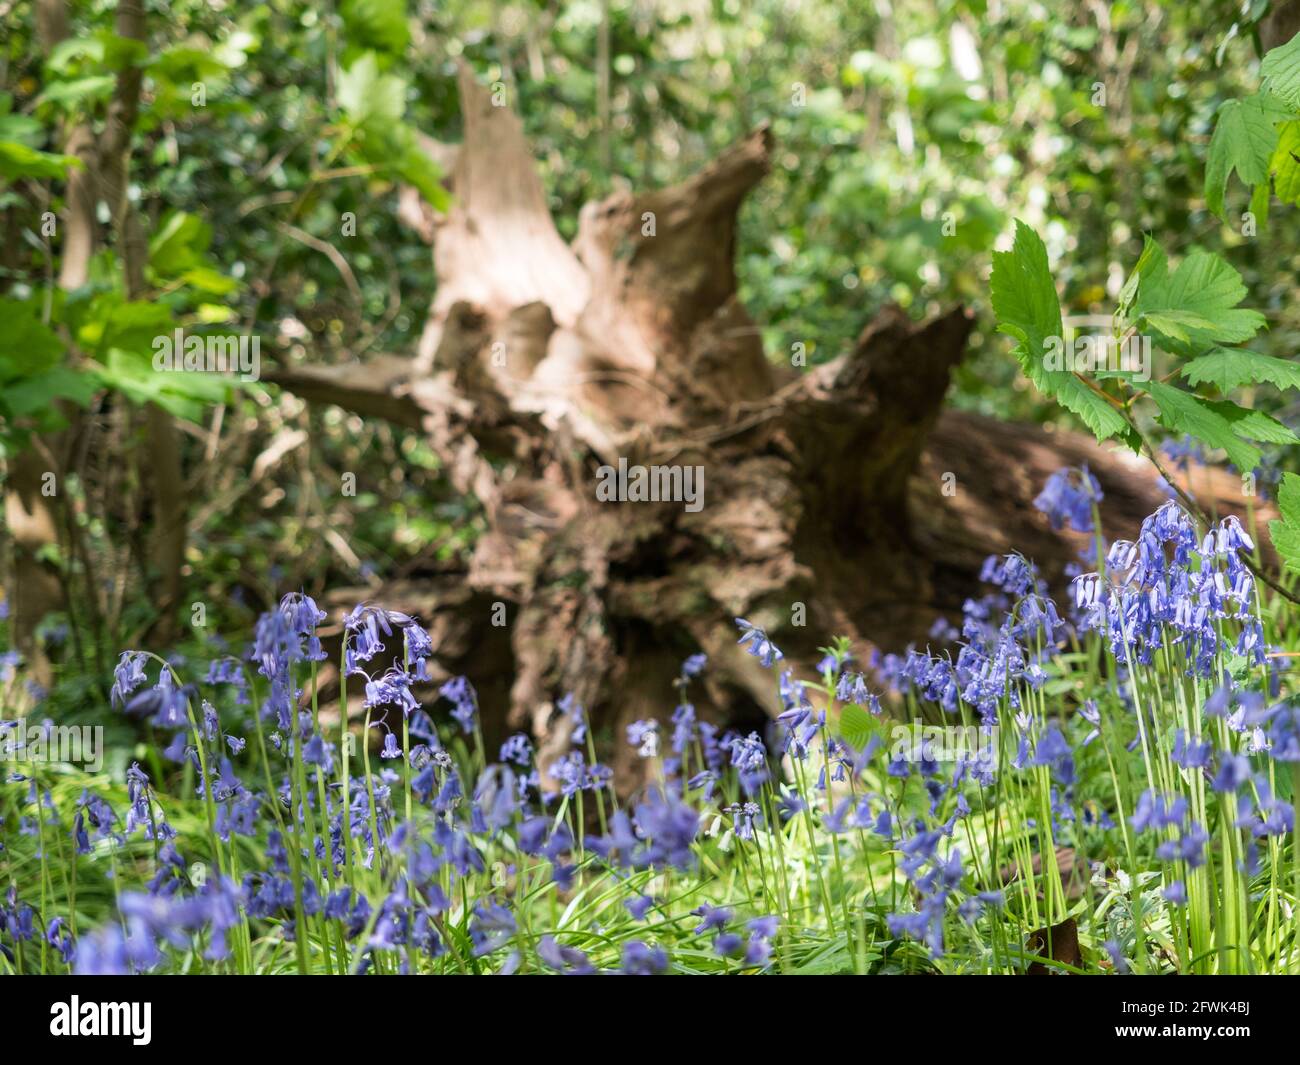 a fallen treeand exposed roots out of focus bokeh background behind English purple mauve violet Blubells in foreground with dappled sun light Stock Photo